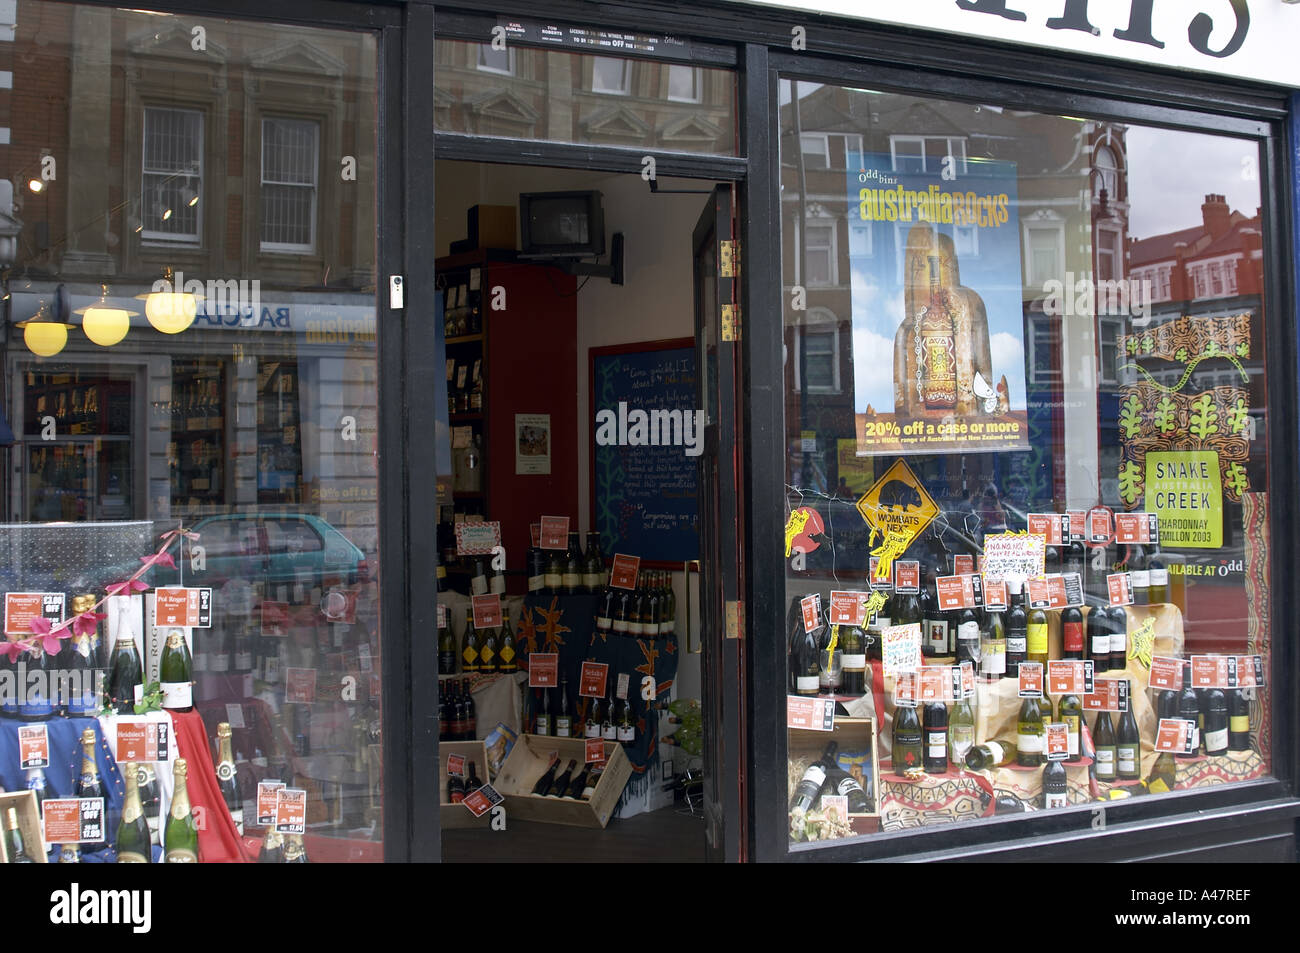 Oddbins wine shop window off licence in Muswell Hill London N10 England  Stock Photo